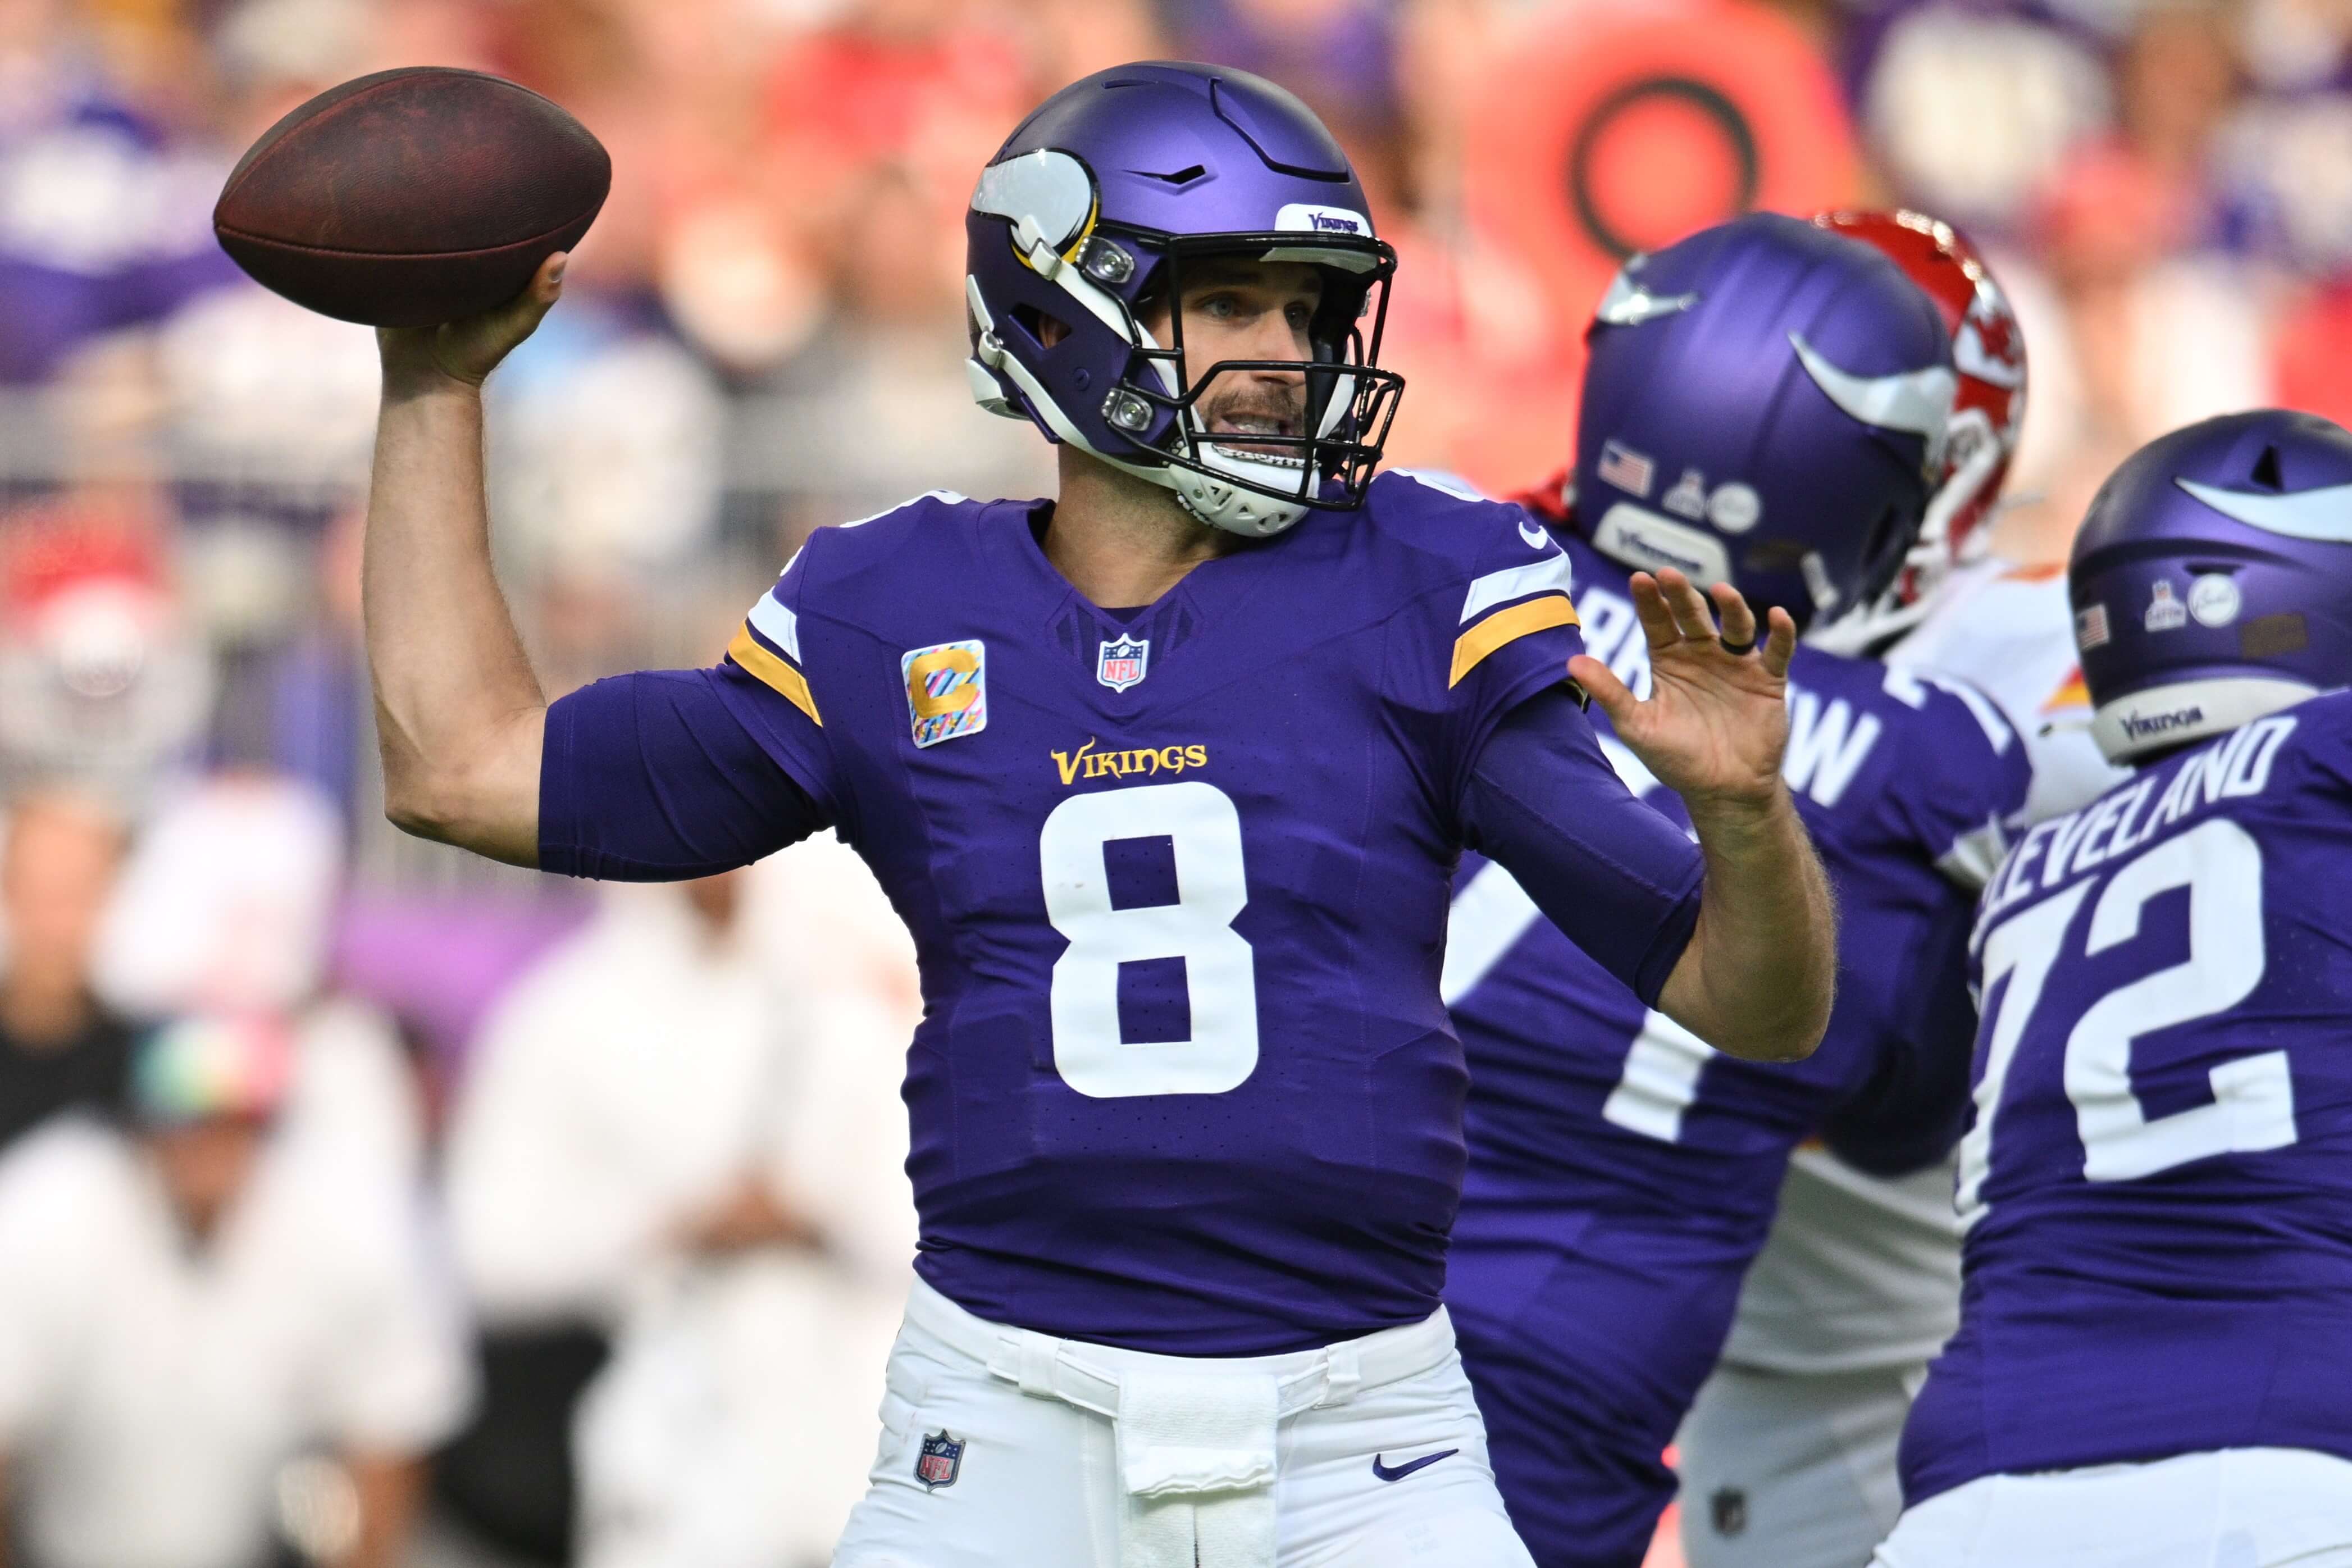 Week 6 NFL Parlay and Picks: Cousins Blows Away Bears in Windy City